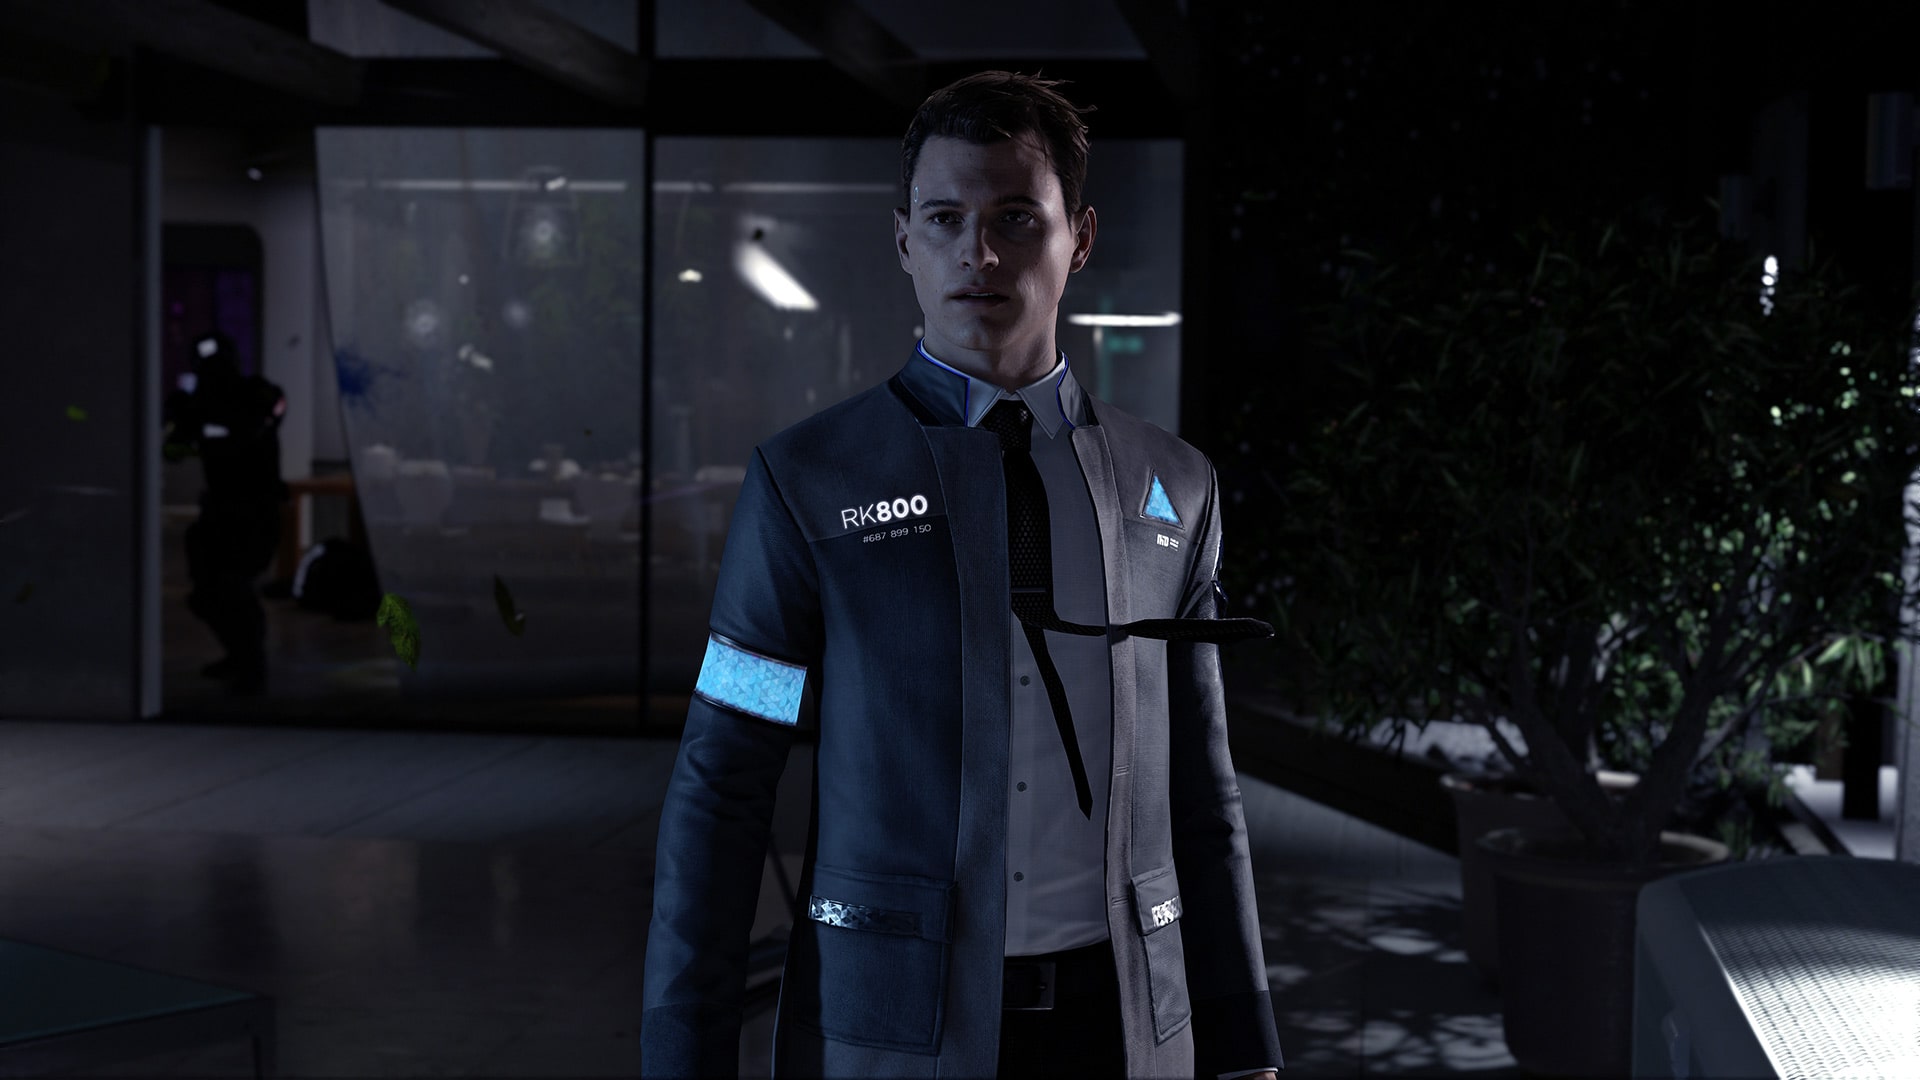 50% discount on Detroit: Become Human Digital Deluxe Edition PS4